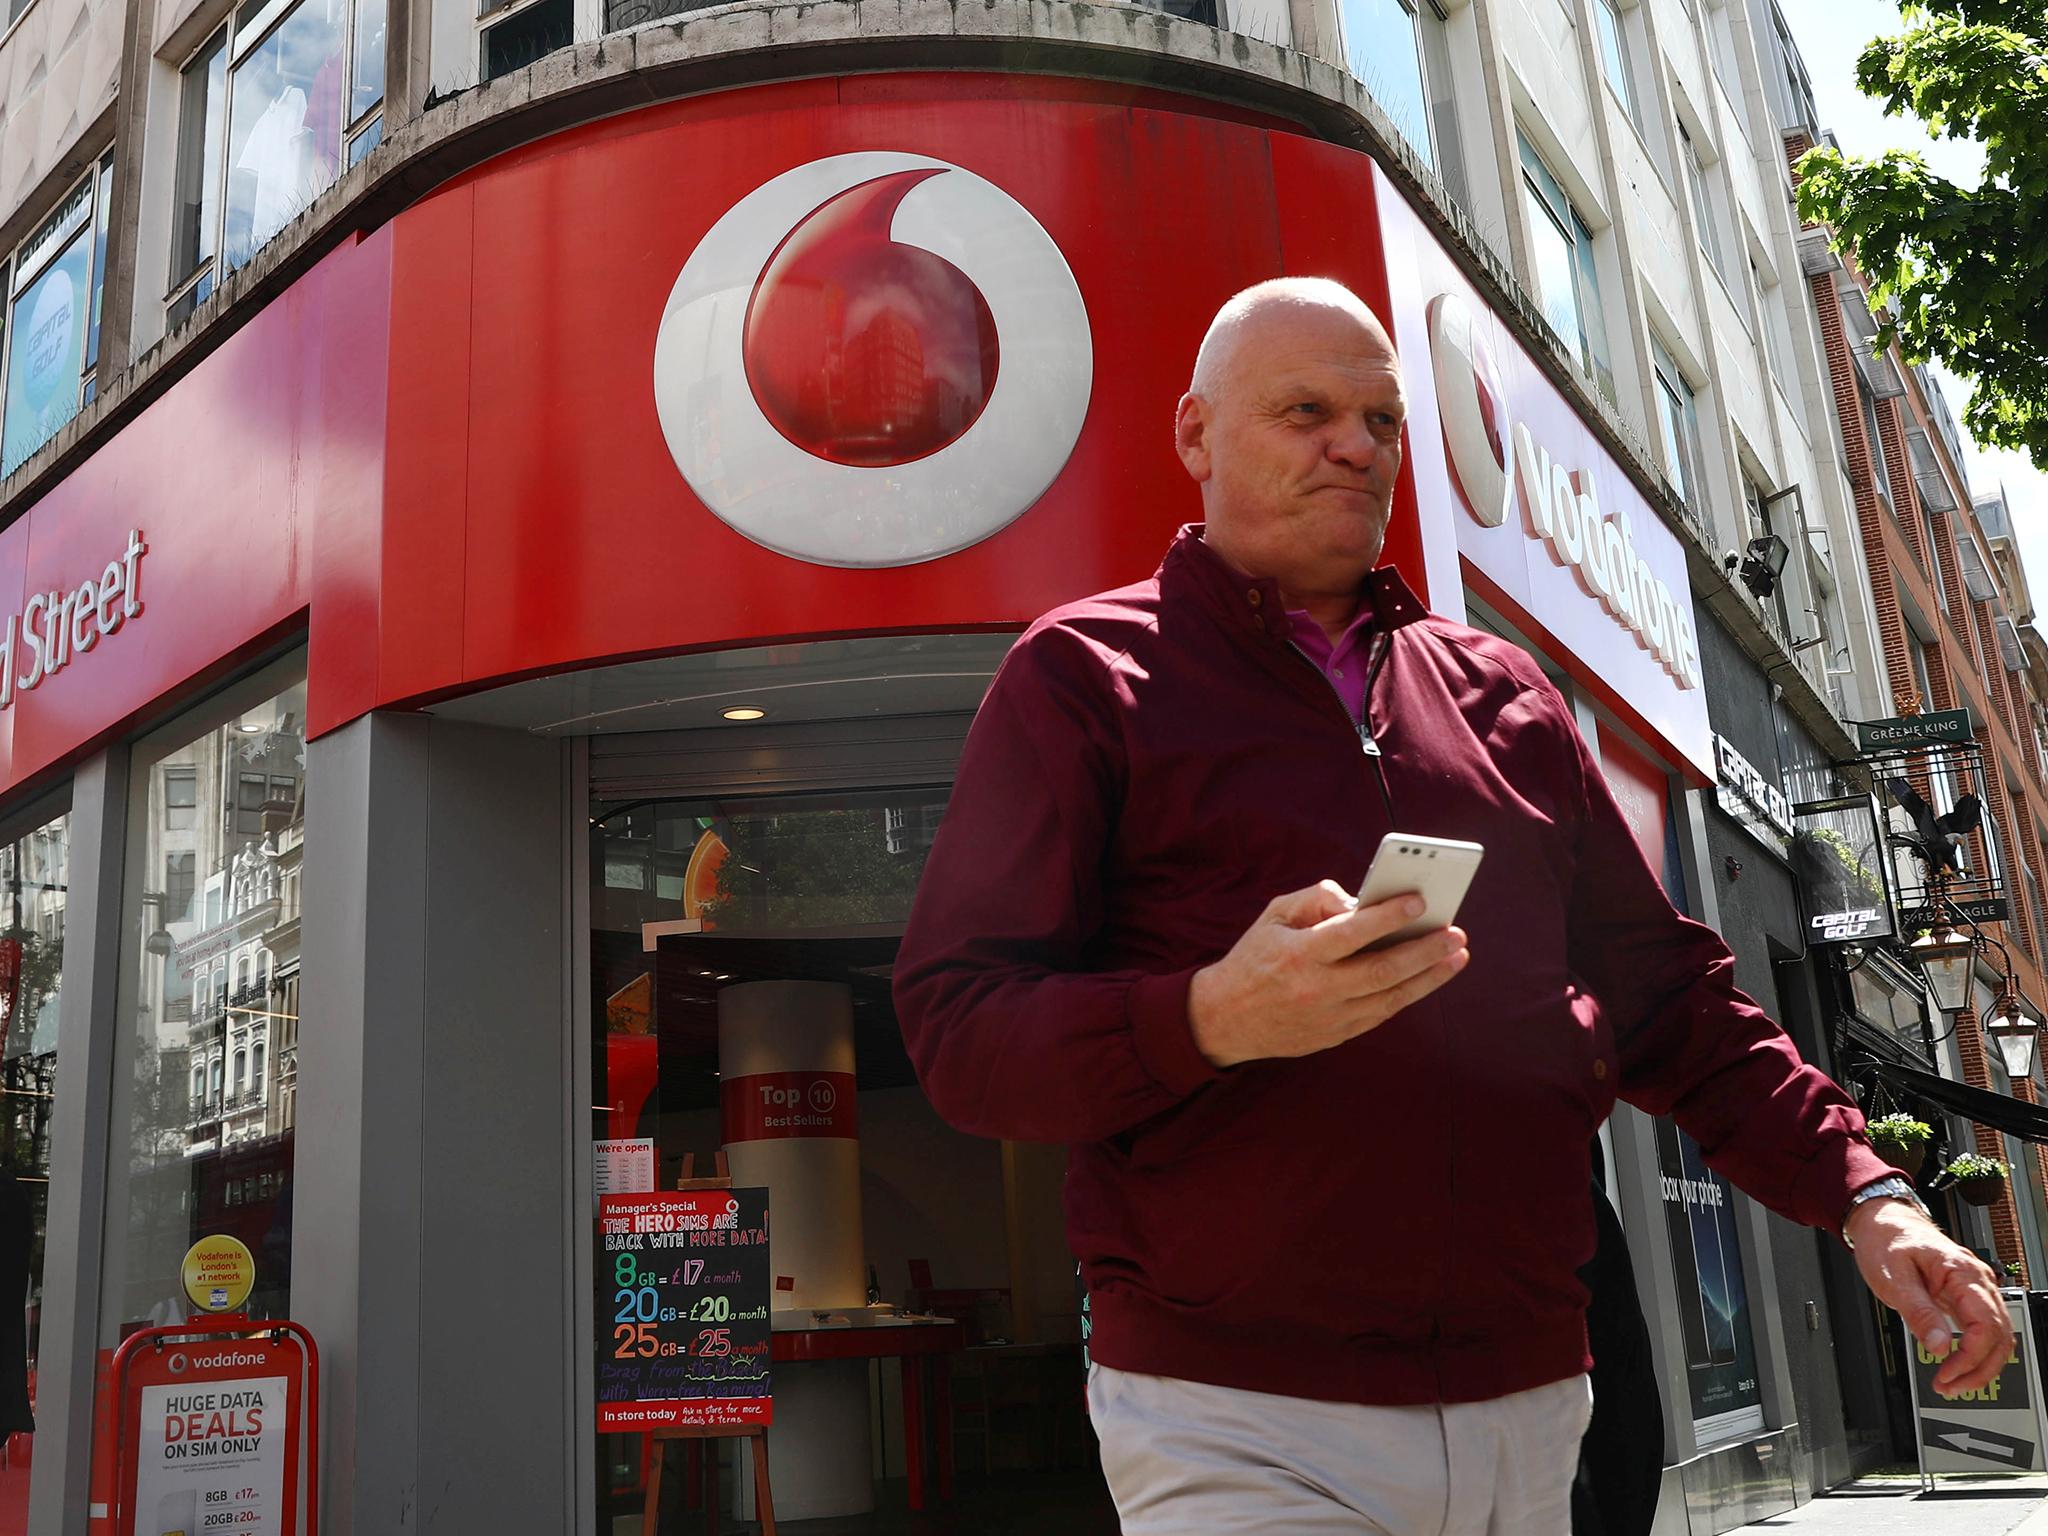 Vodafone is in the red like the corporate colours but the company says customers should be excited about 5G